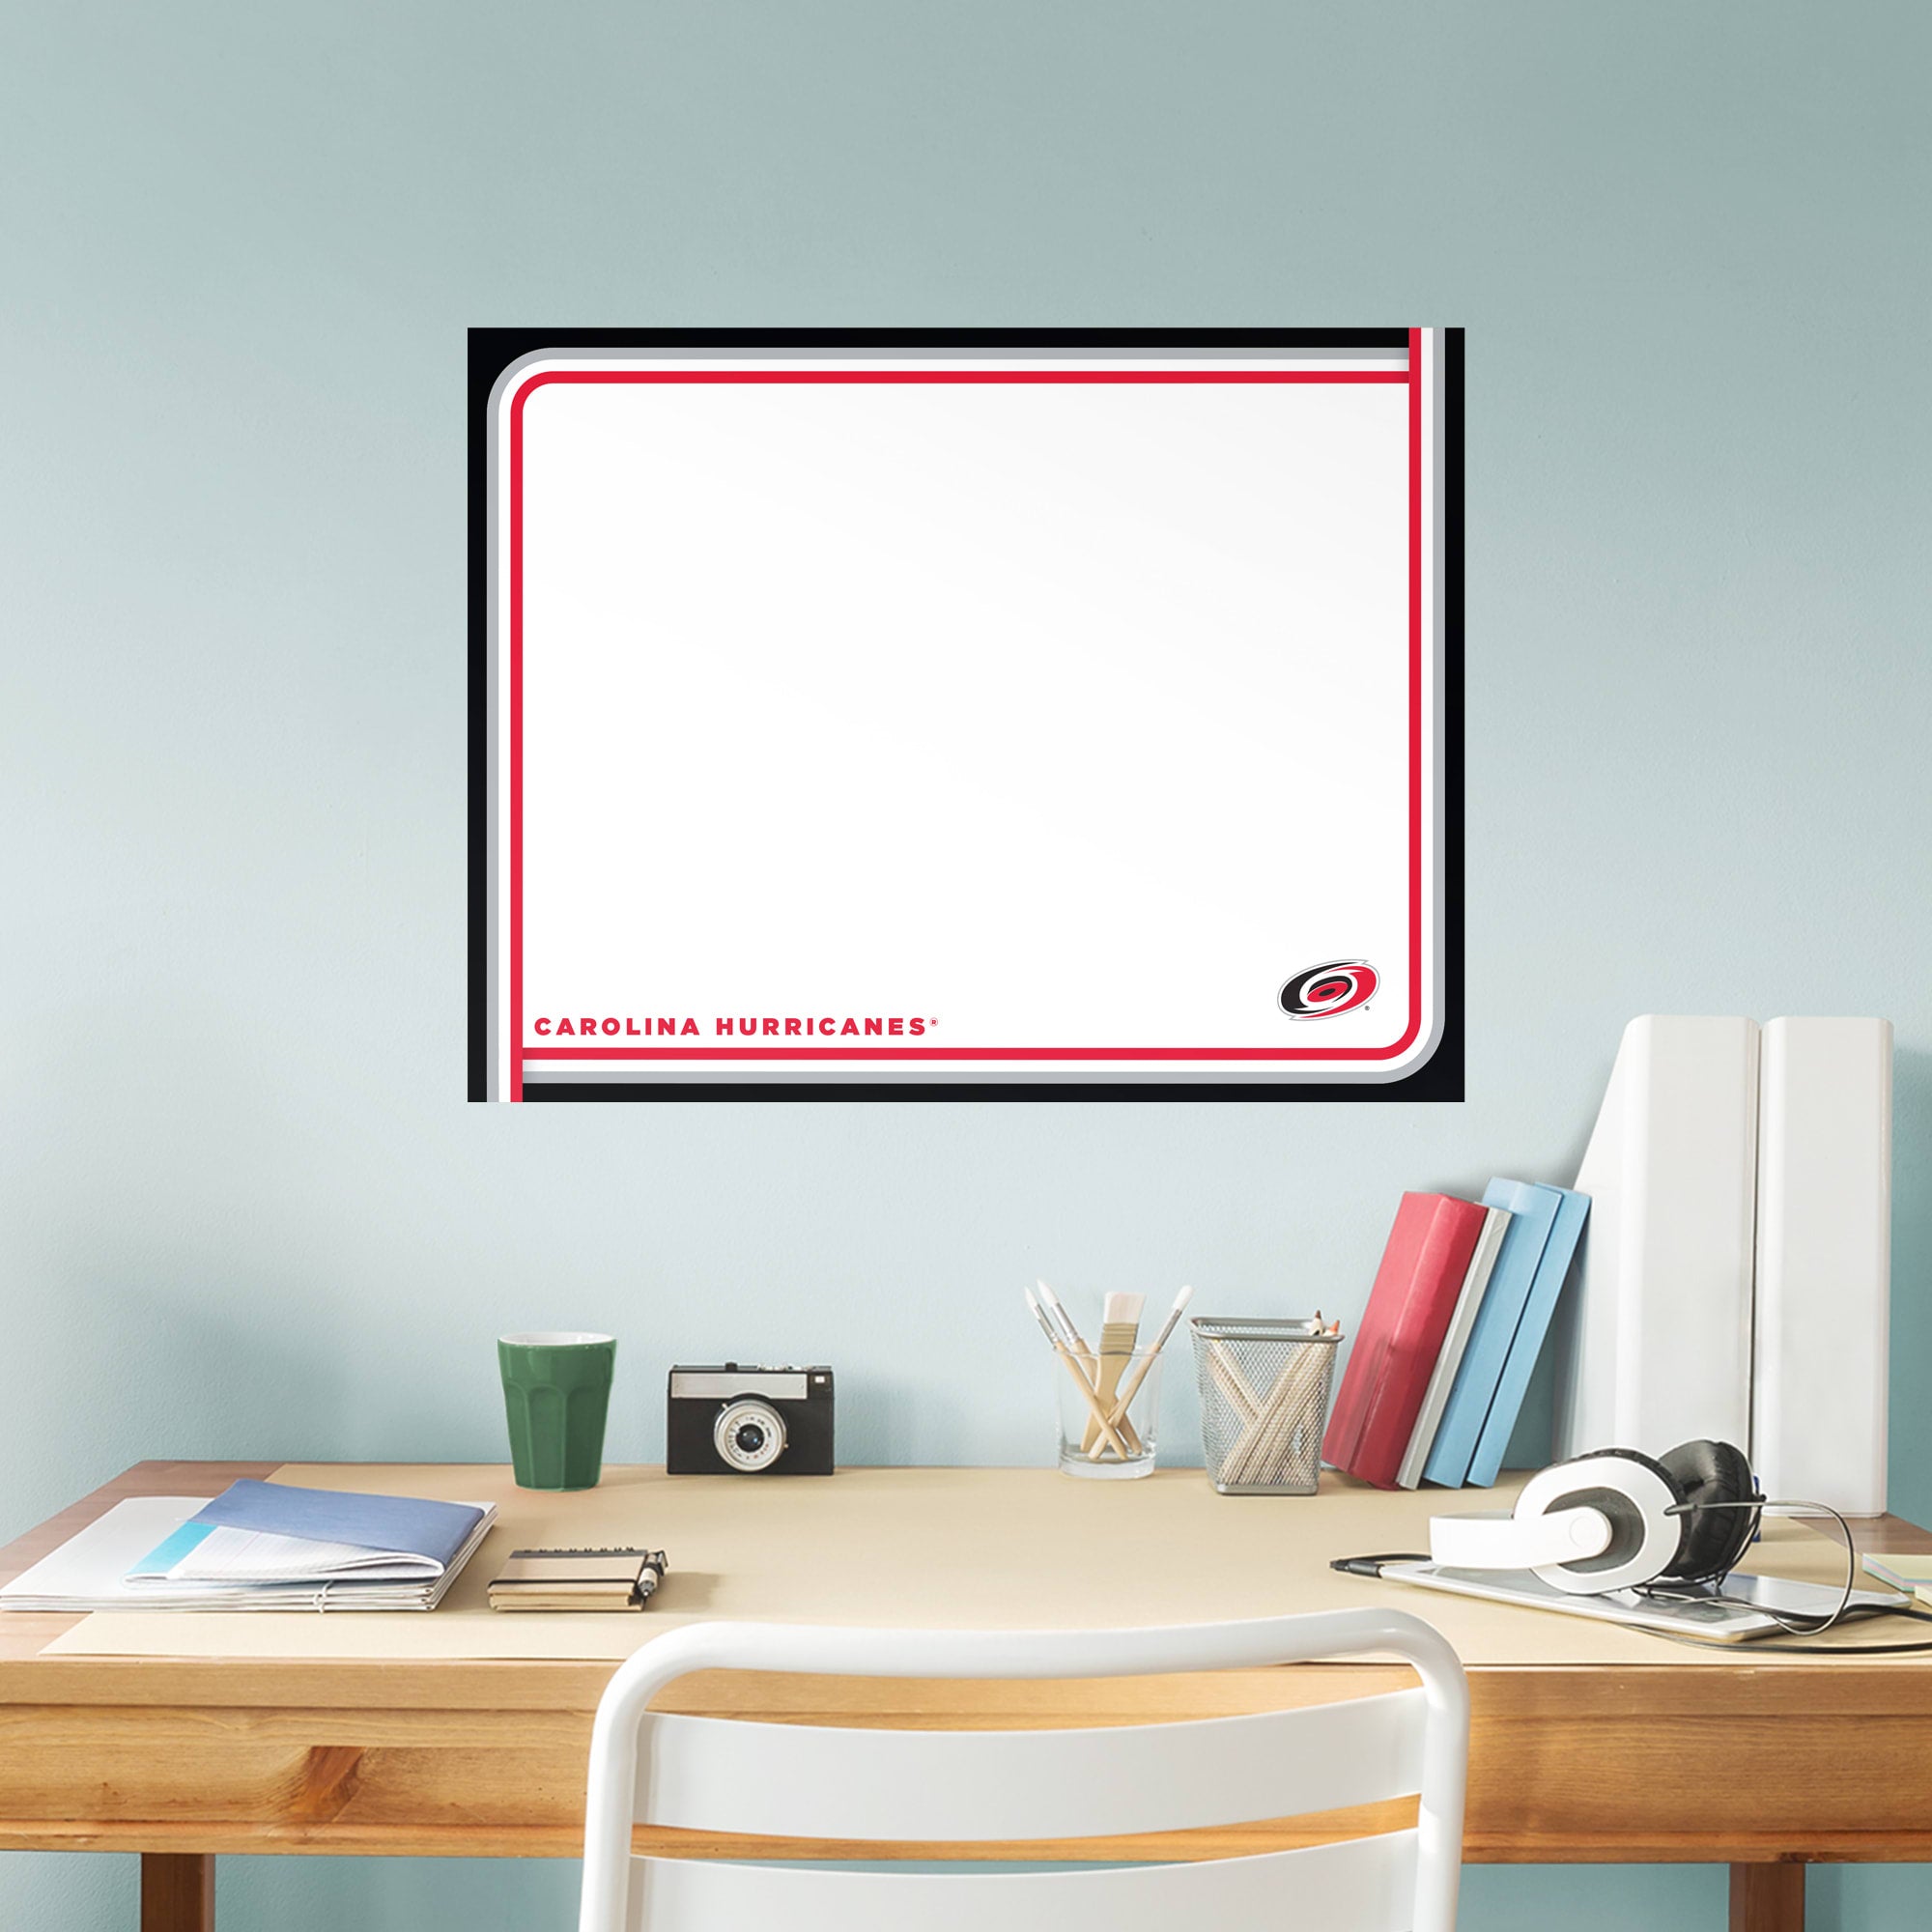 Carolina Hurricanes: Dry Erase Whiteboard - X-Large Officially Licensed NHL Removable Wall Decal XL by Fathead | Vinyl